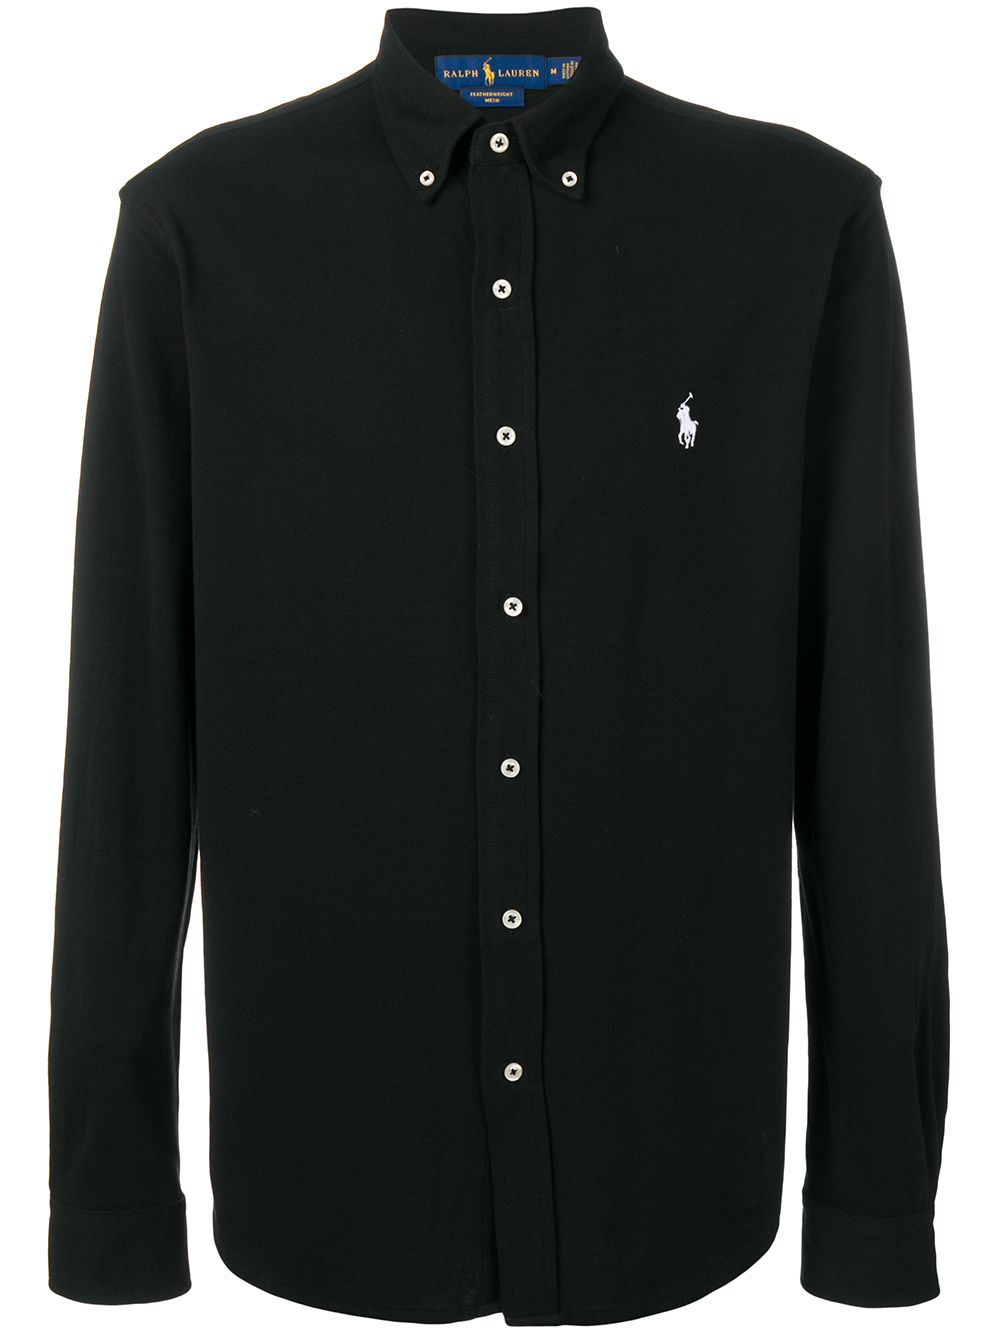 Image 1 of Polo Ralph Lauren logo embroidered button-down shirt